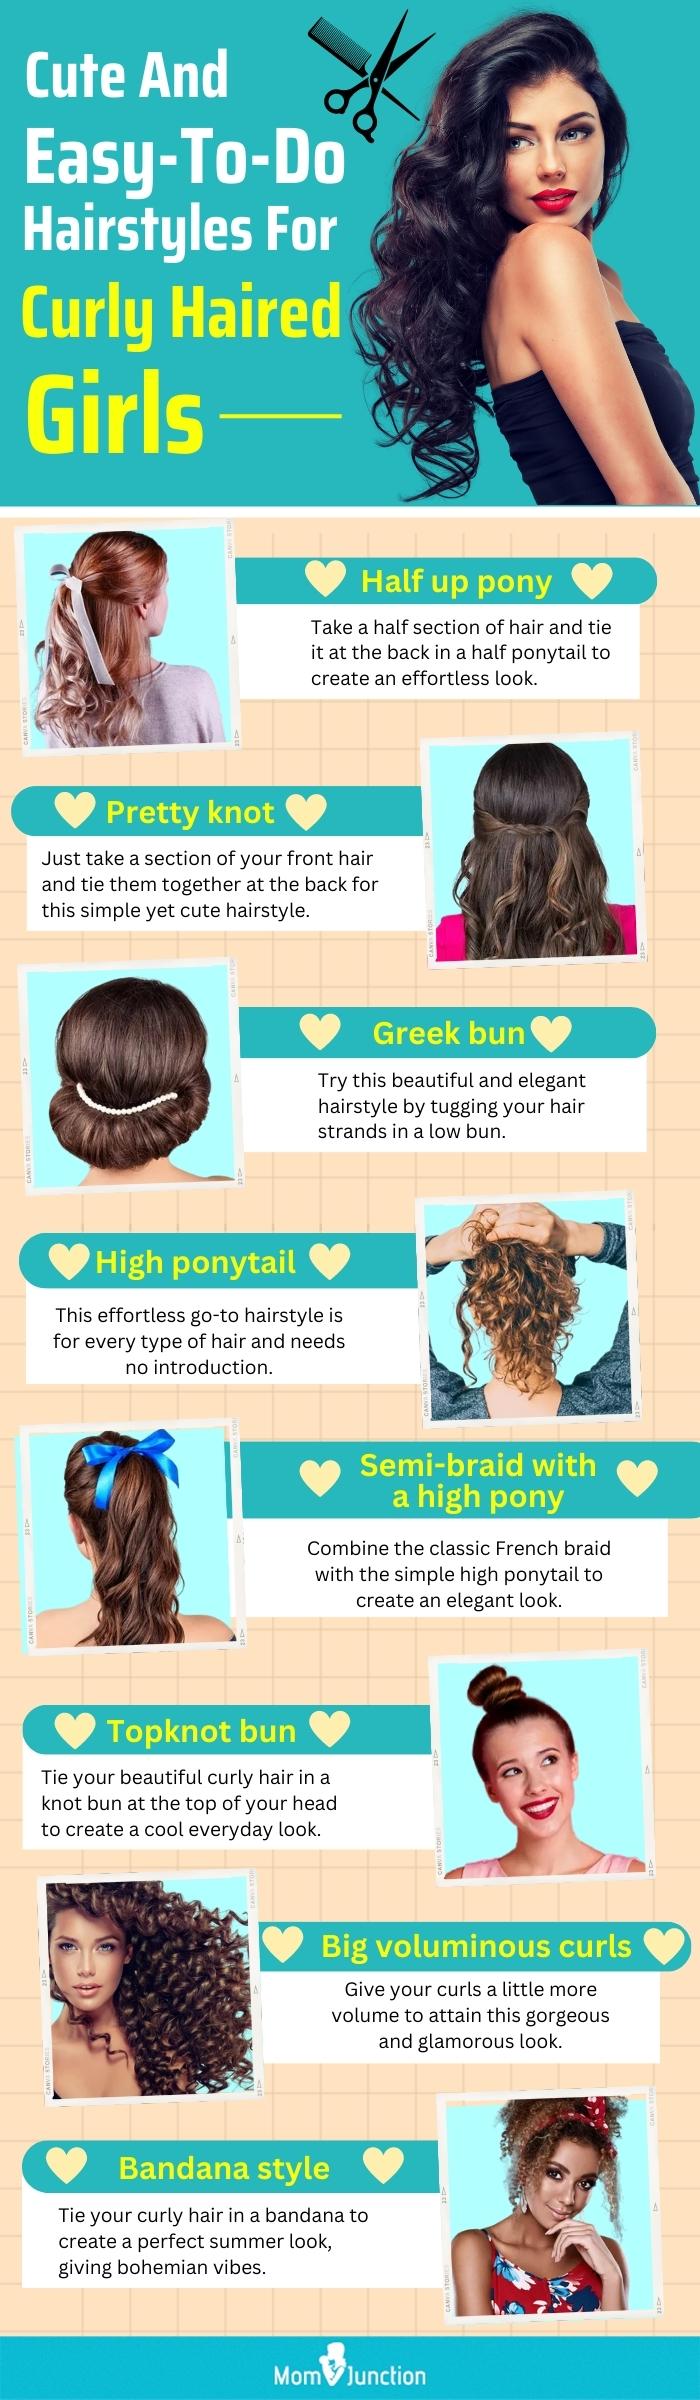 Most Amazing Curly Hairstyles For Women